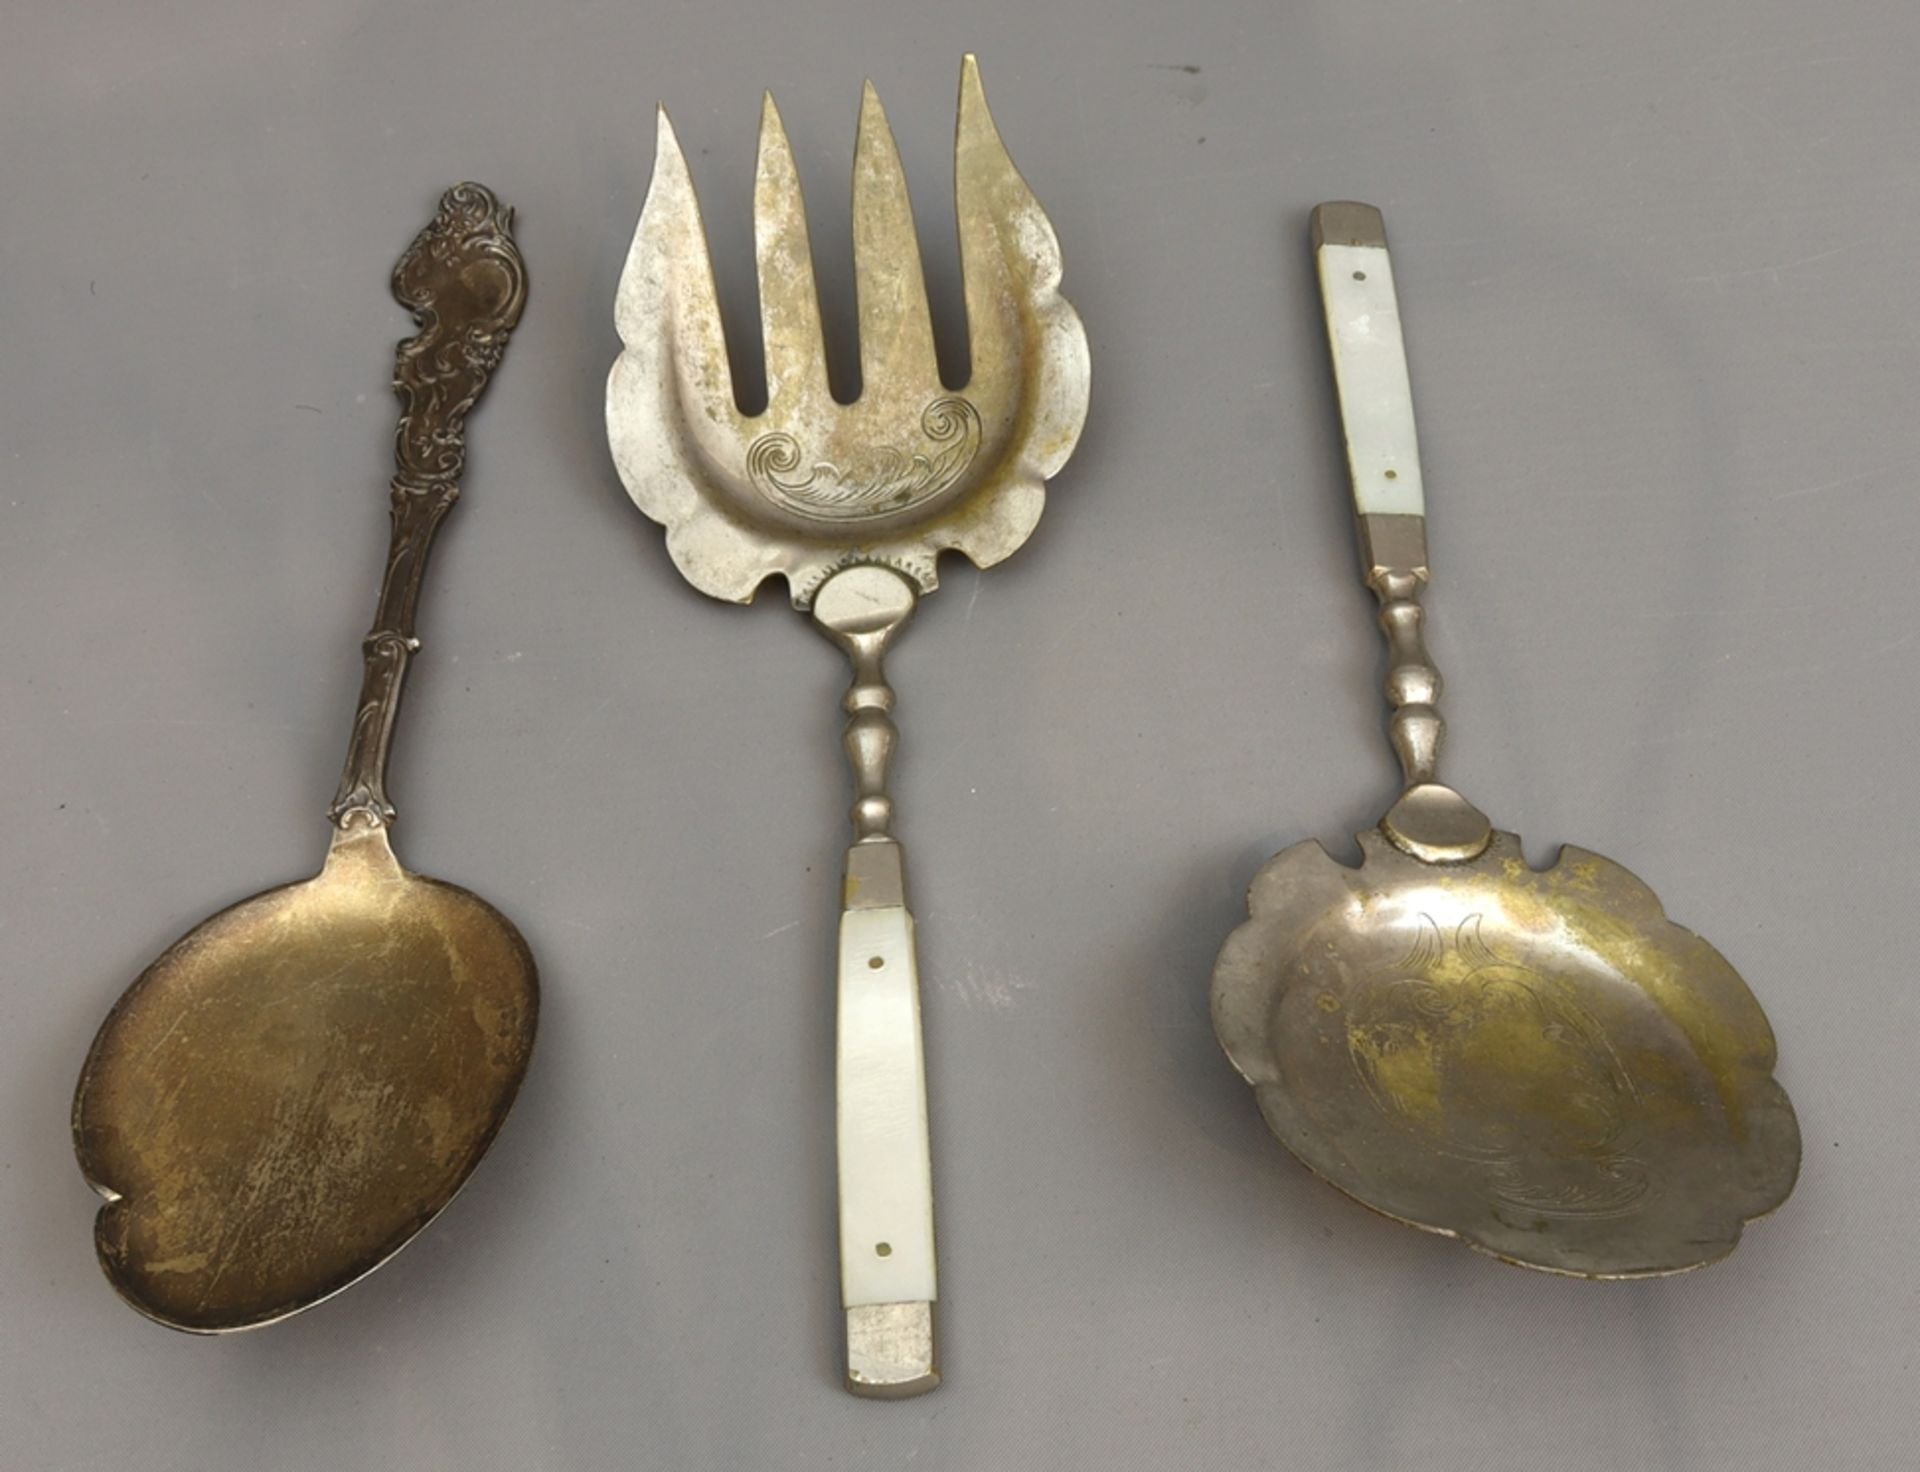 Lot of cake knives and lifters, Historicism c. 1900-1920, German - Image 2 of 3